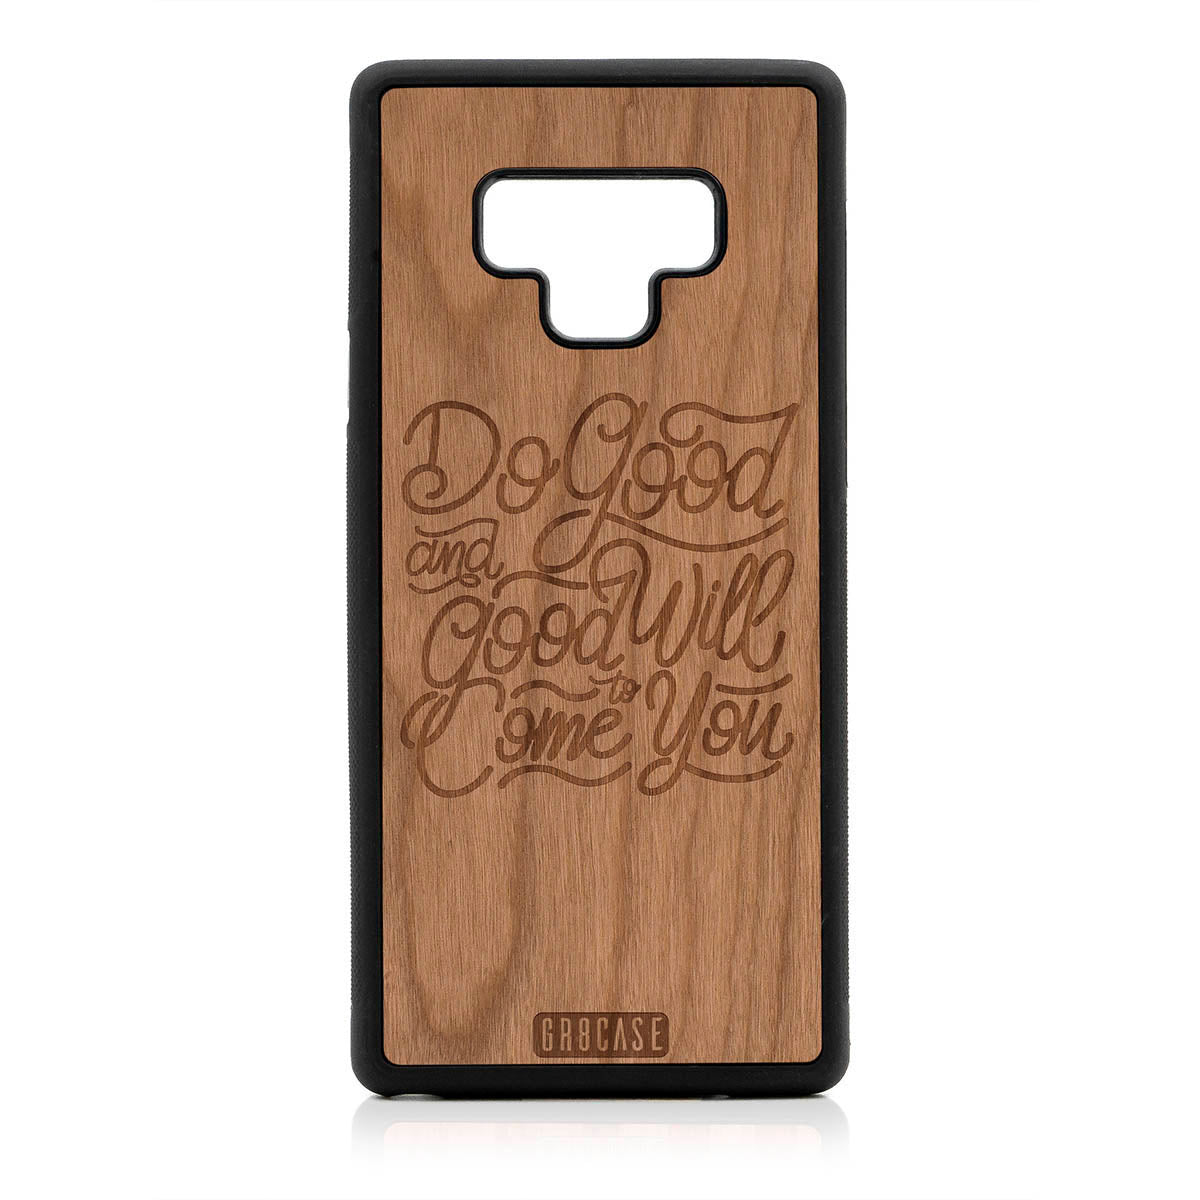 Do Good And Good Will Come To You Design Wood Case For Samsung Galaxy Note 9 by GR8CASE